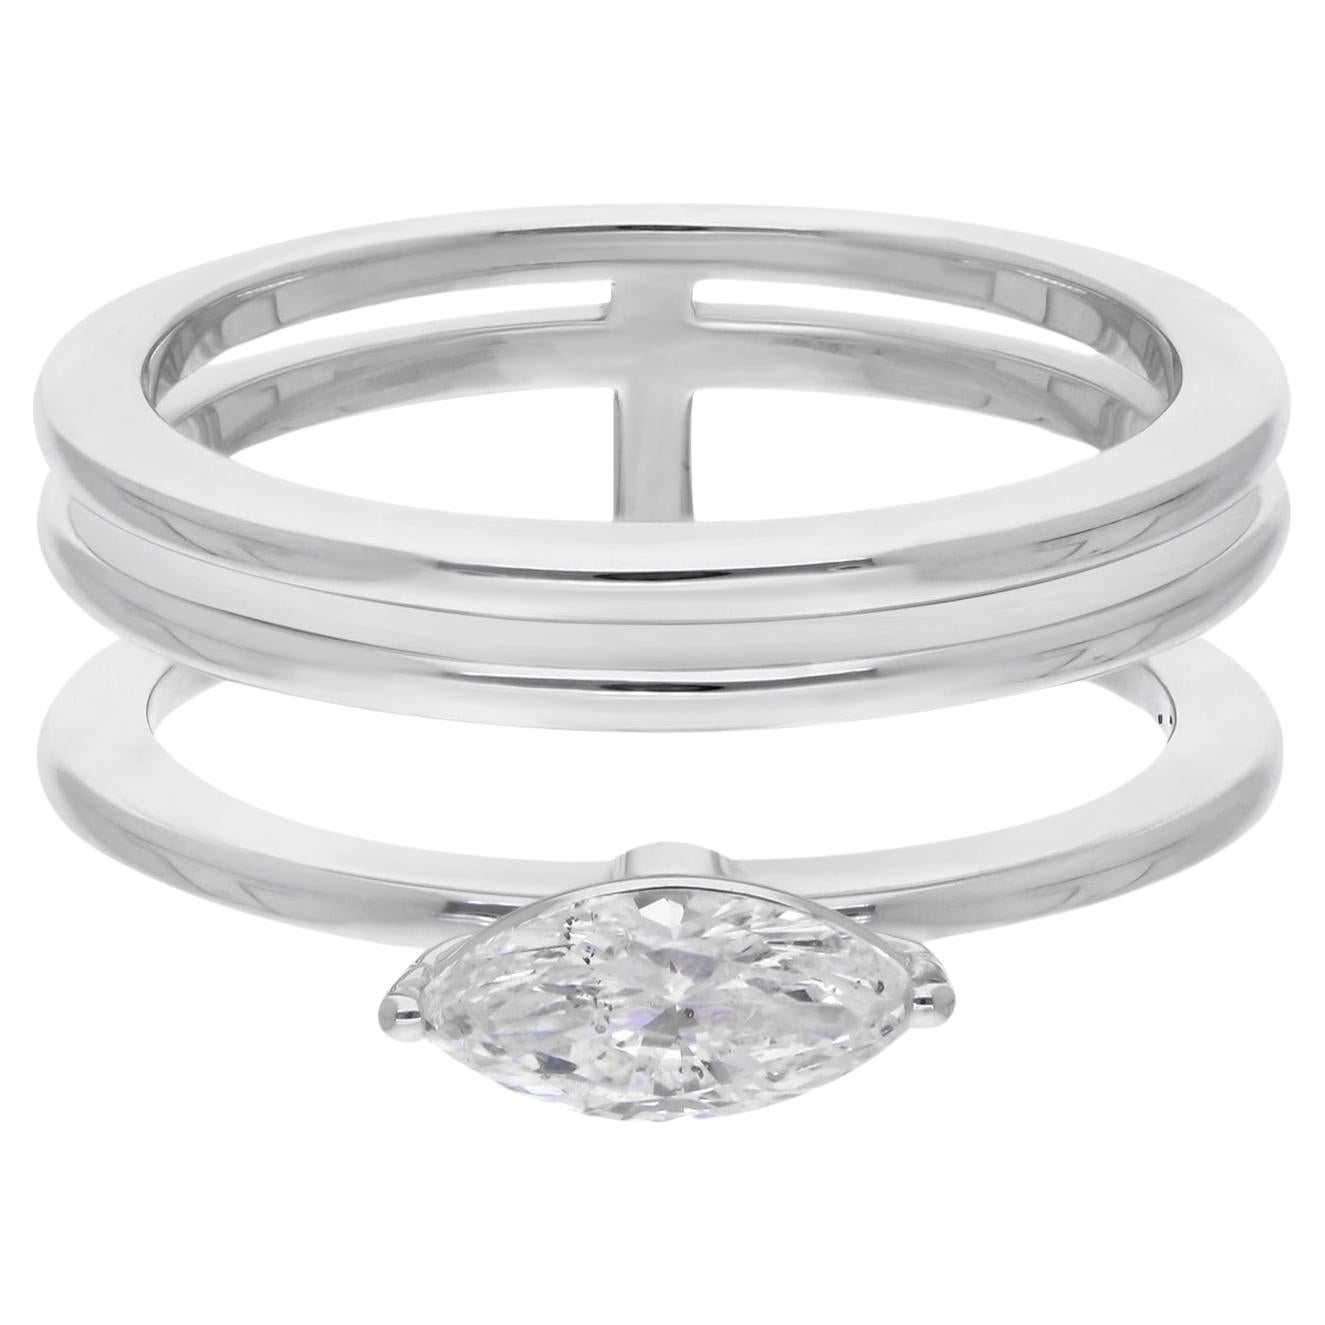 0.47 Carat Solitaire Marquise Diamond Band Ring 14 Karat White Gold Fine Jewelry